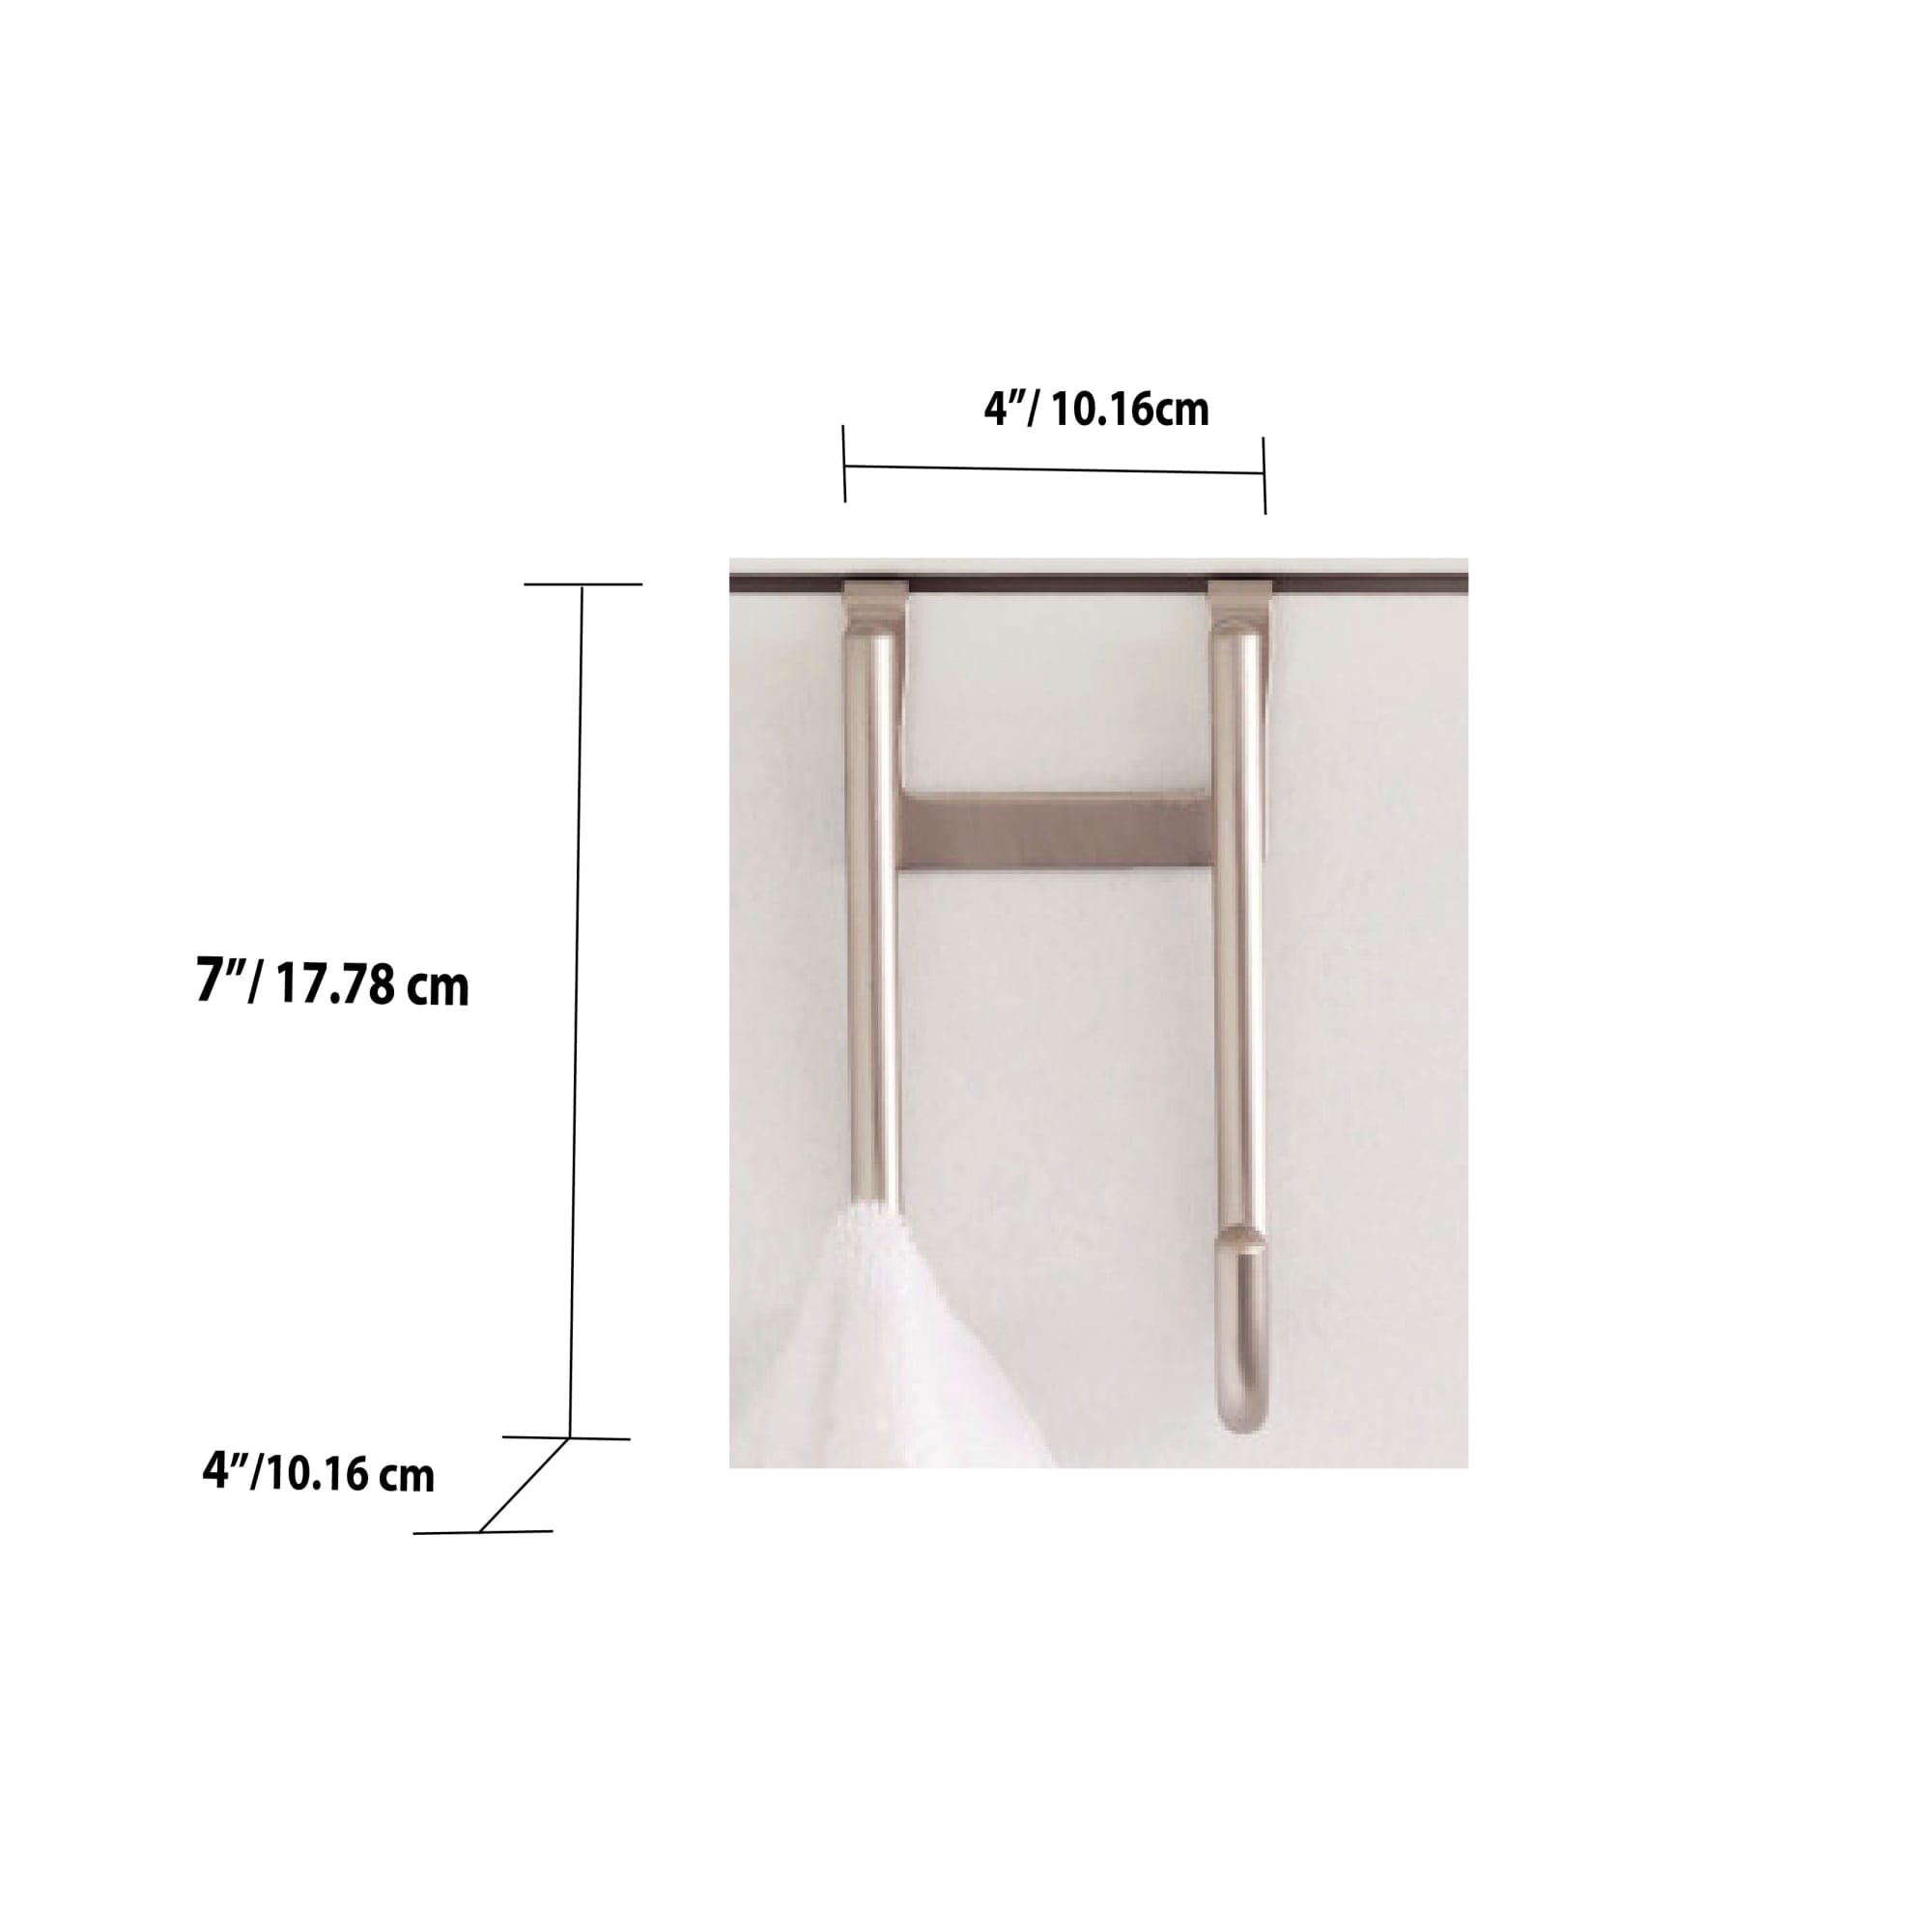 Home Basics Heavy Weight Brushed Satin Nickel Rust-Proof Over the Door Double Hook $6.00 EACH, CASE PACK OF 8